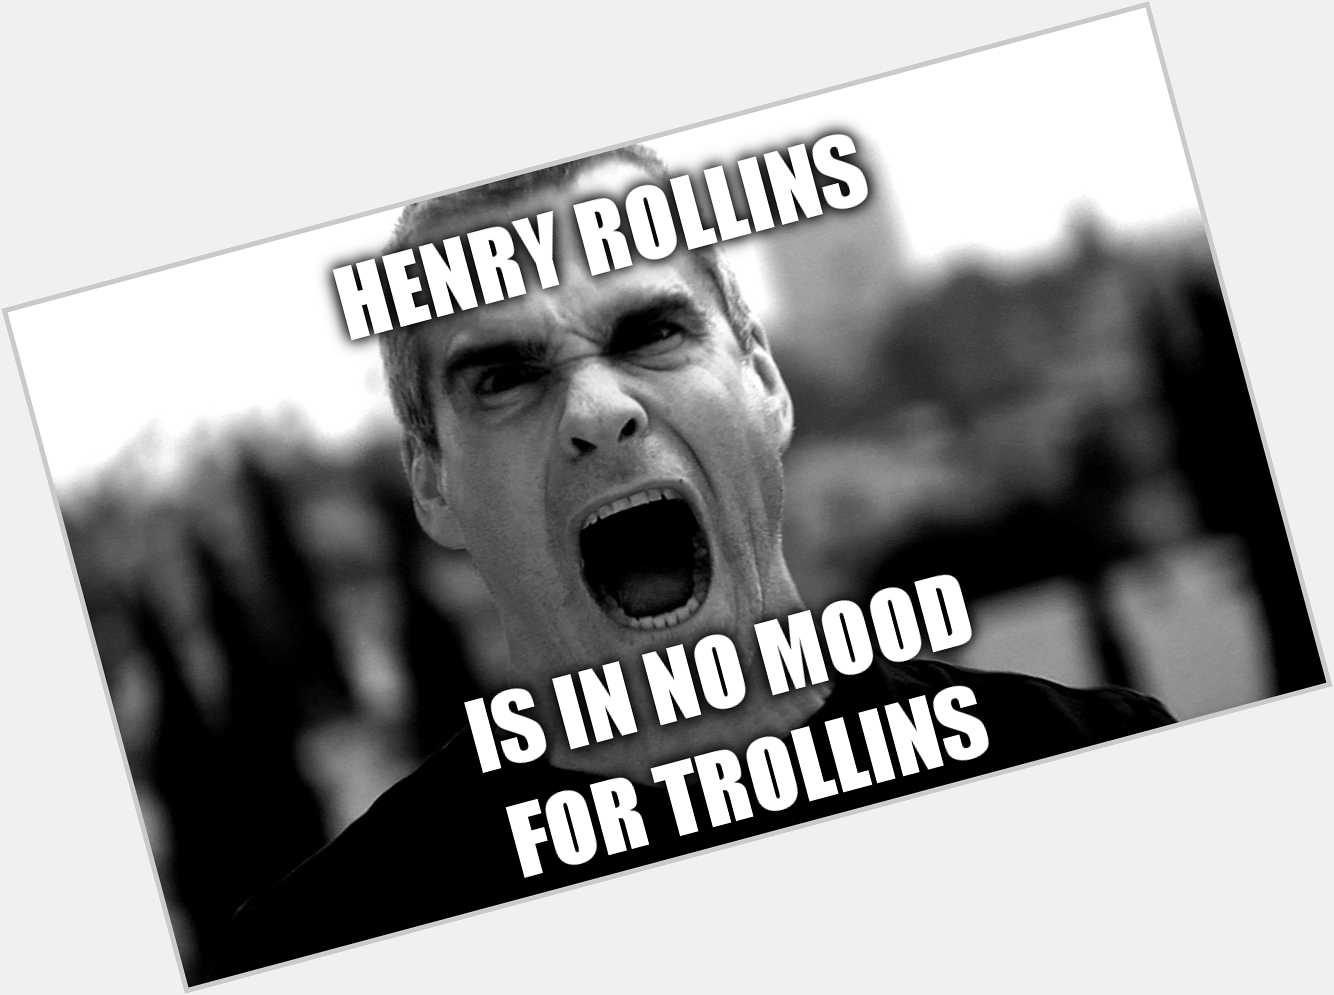 Happy 60th birthday to Henry Rollins, from one black coffee enthusiast to another 